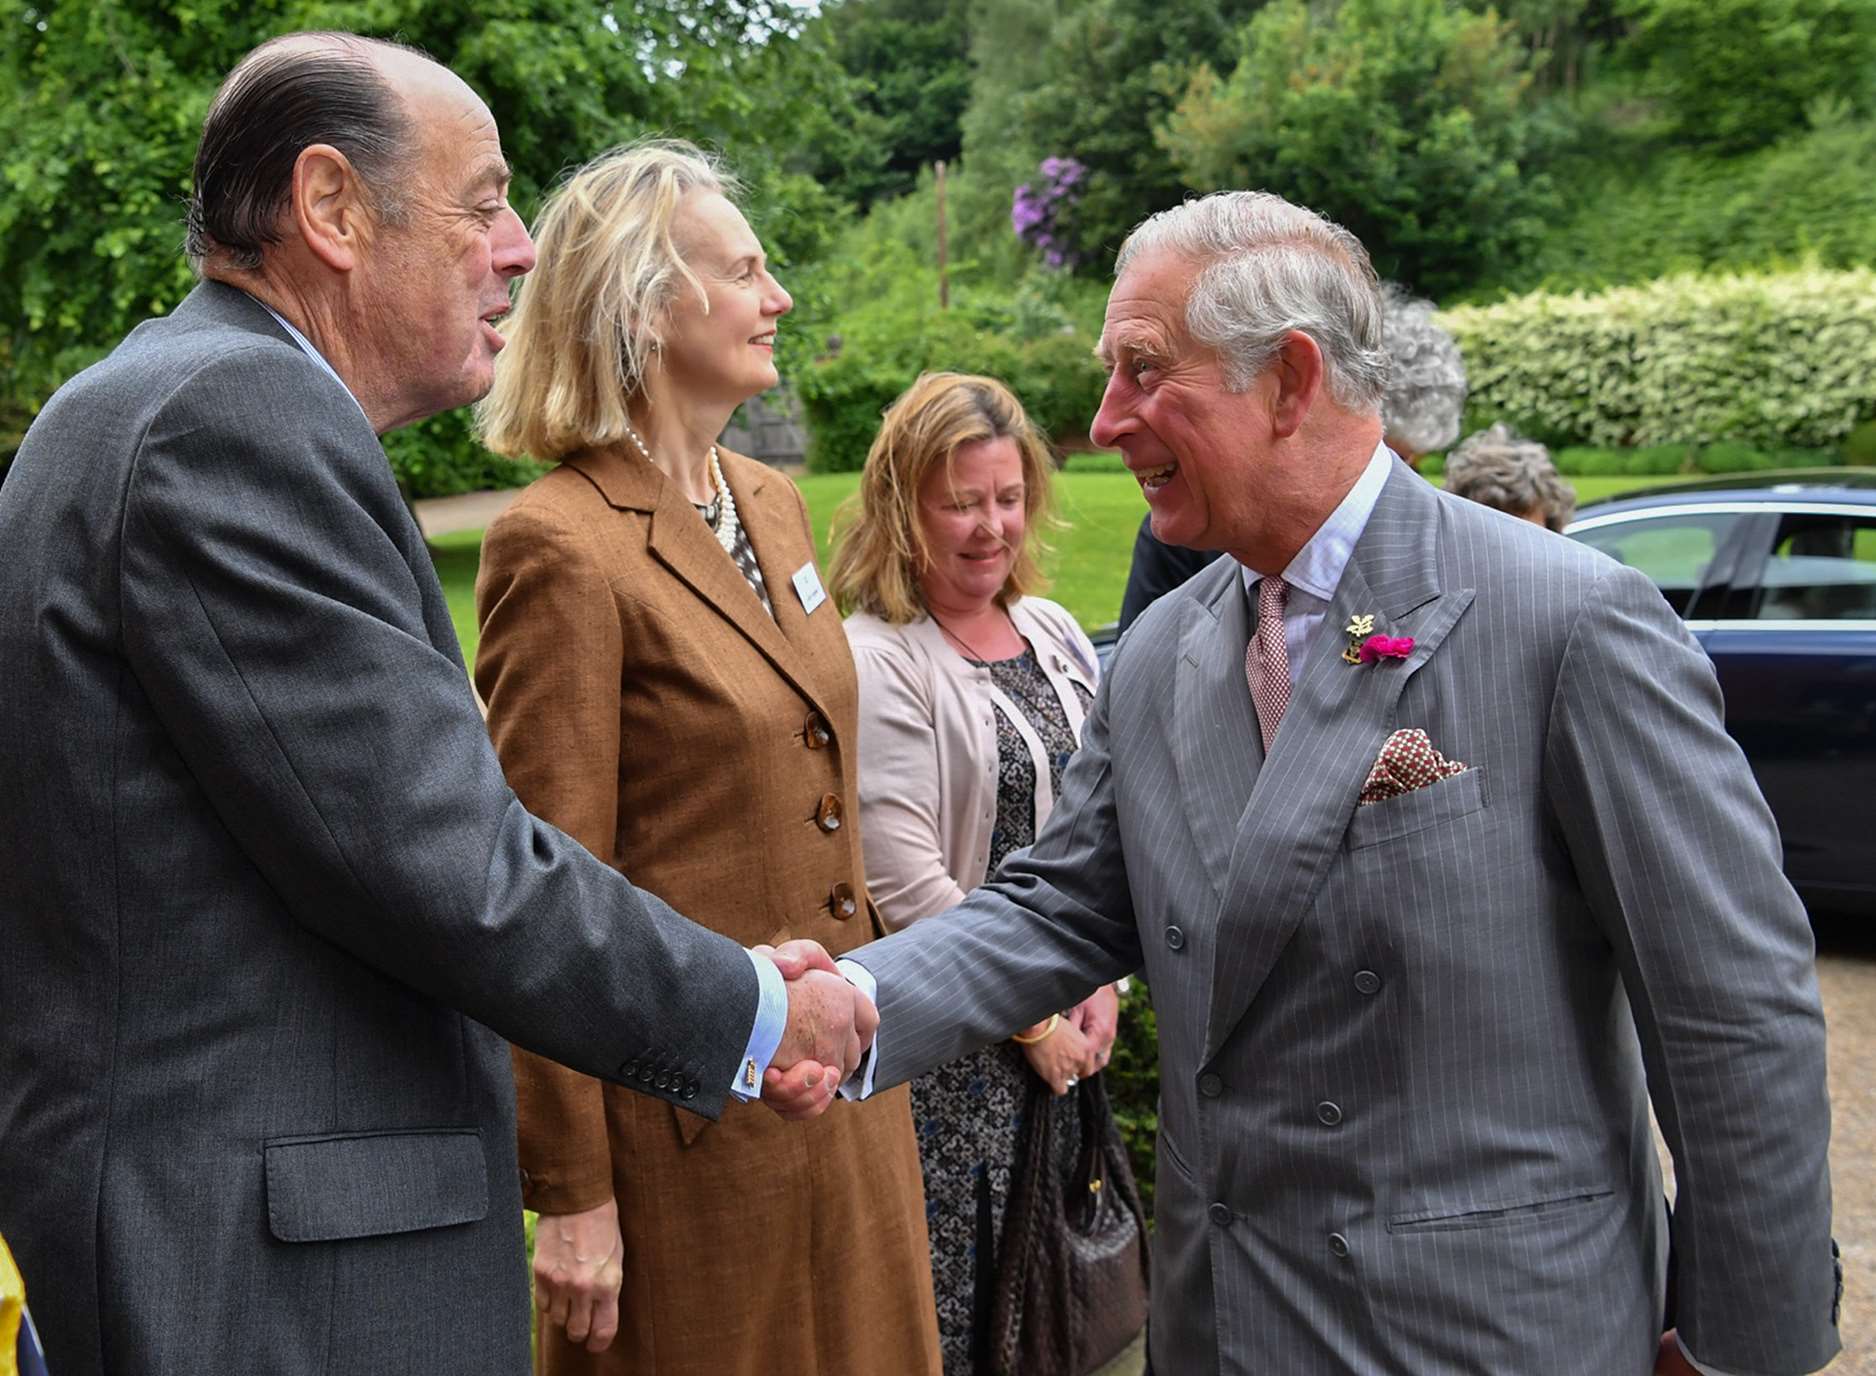 HRH The Prince of Wales being greeted by Sir Nicholas Soames at National Trust property Chartwell in Kent, the family home of Sir Winston Churchill. Photo: Professional Images/@ProfImages